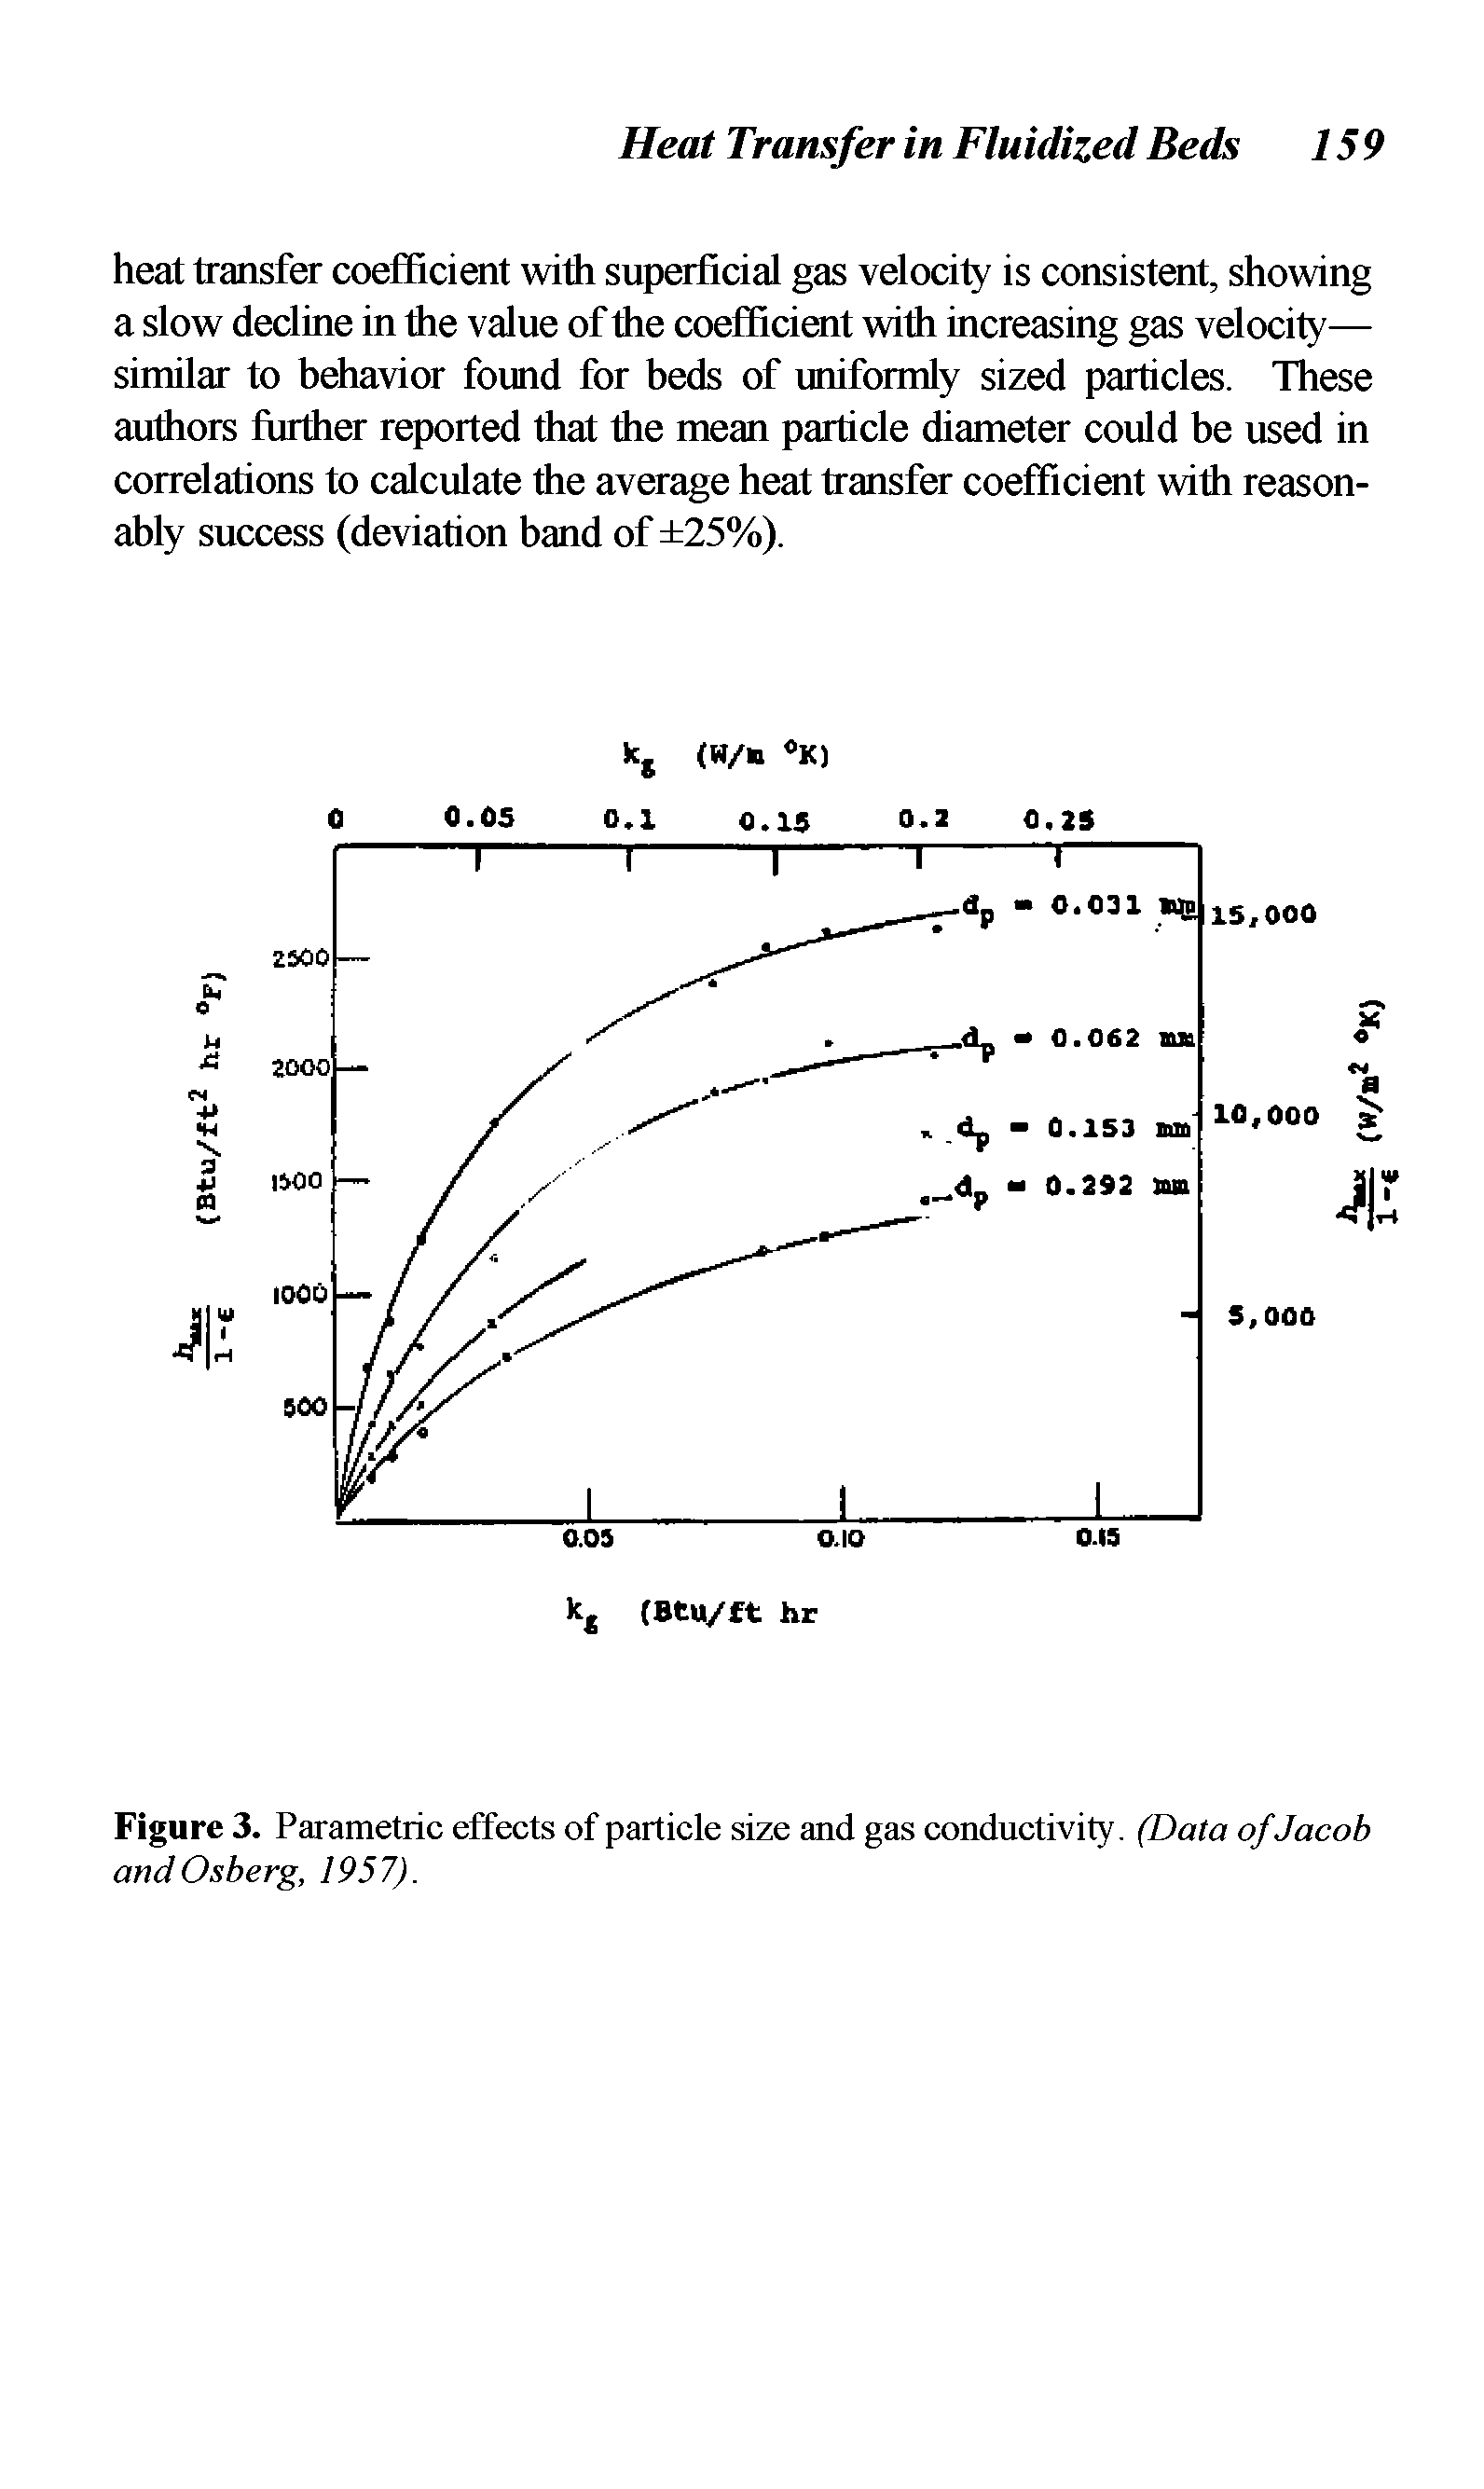 Figure 3. Parametric effects of particle size and gas conductivity. (Data of Jacob andOsberg, 1957).